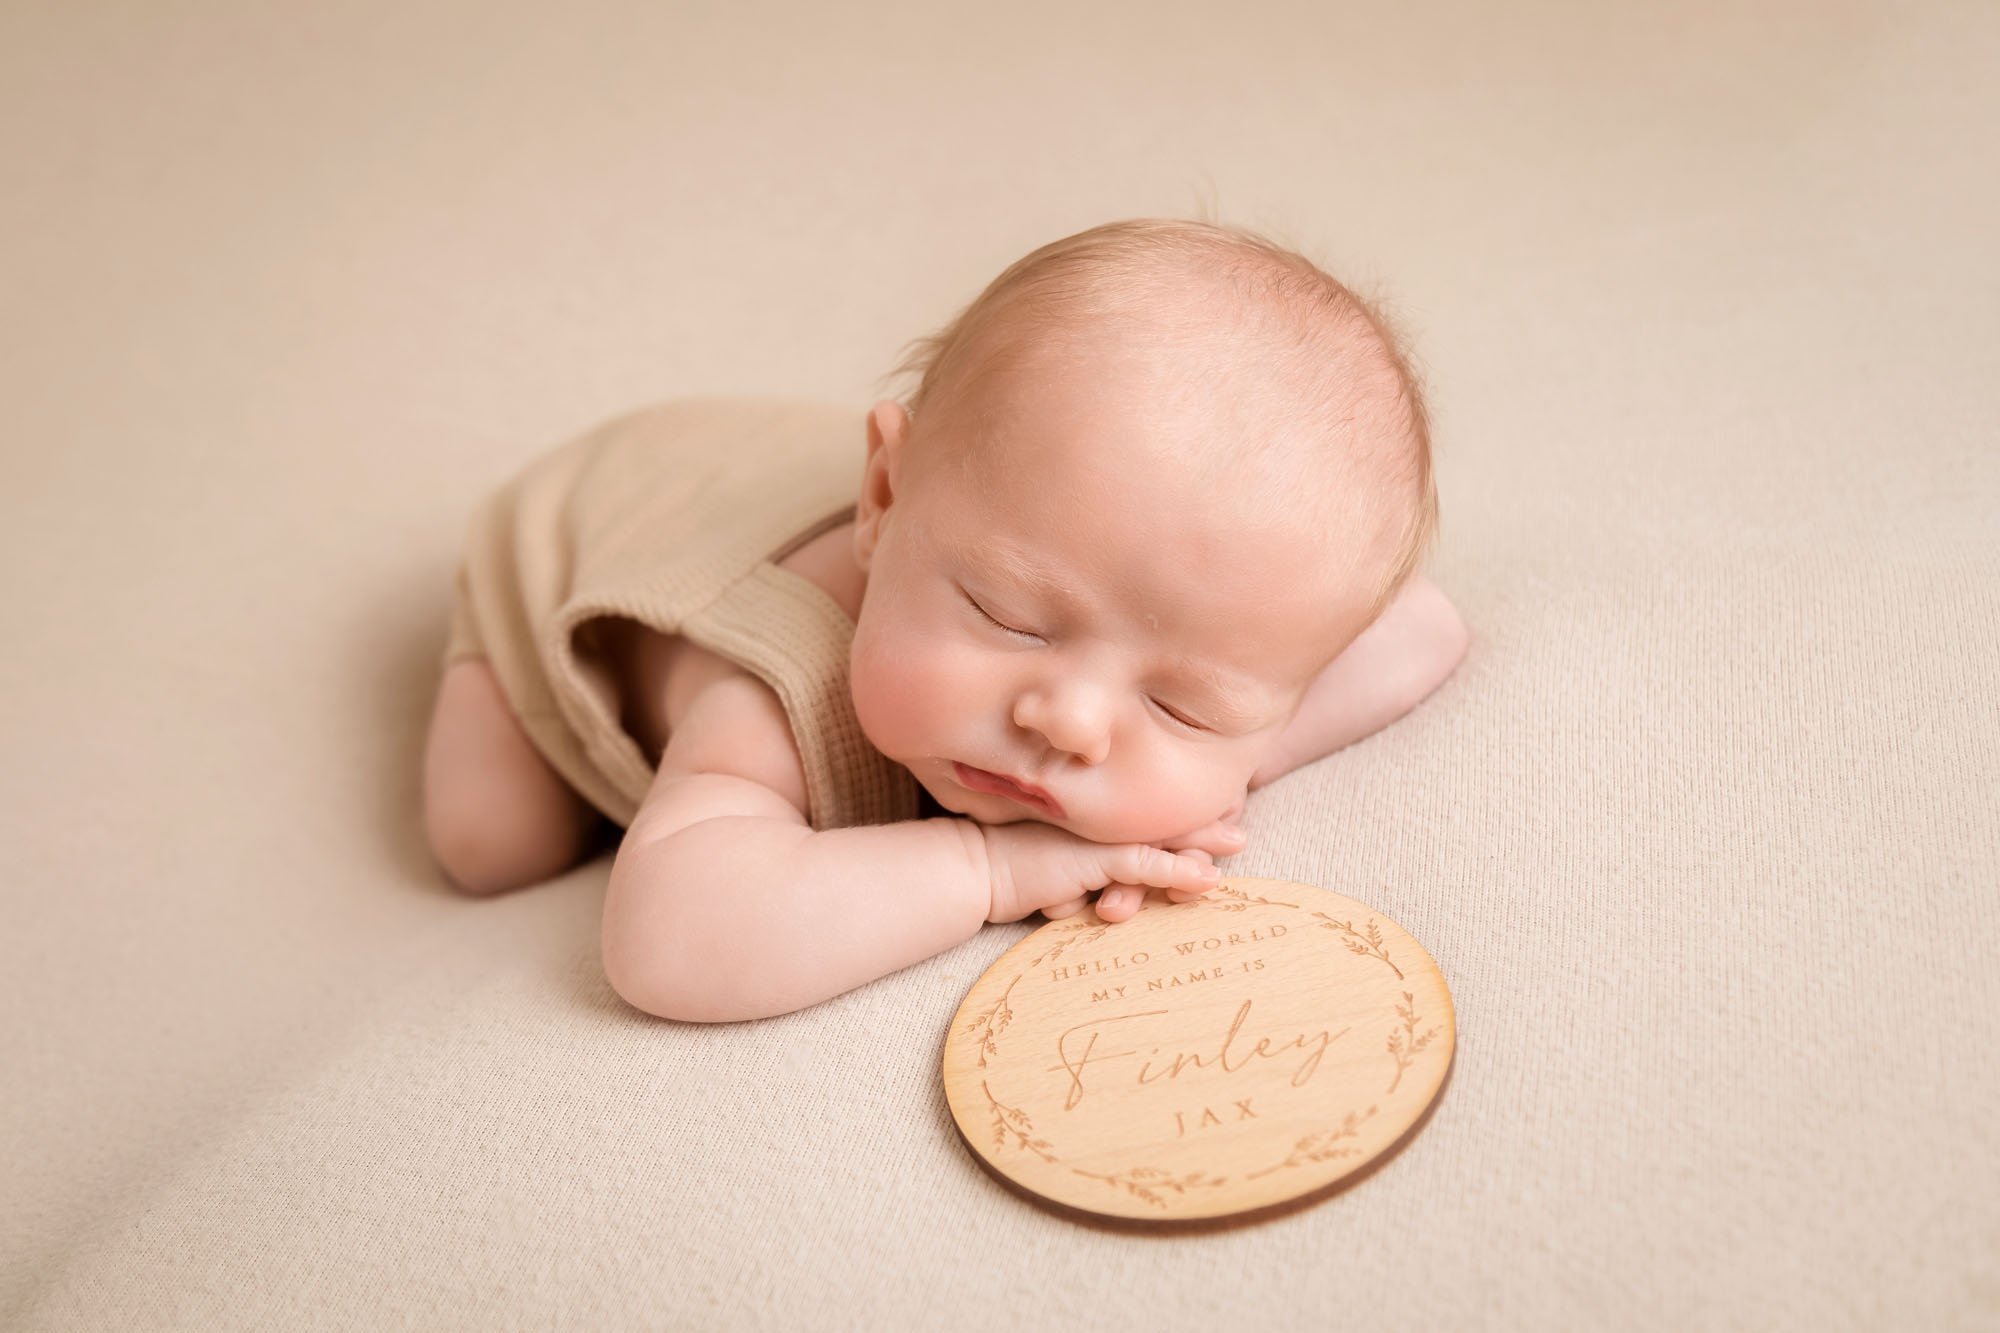 Newborn-photography-in-leeds-holding-personalised-gift.jpg